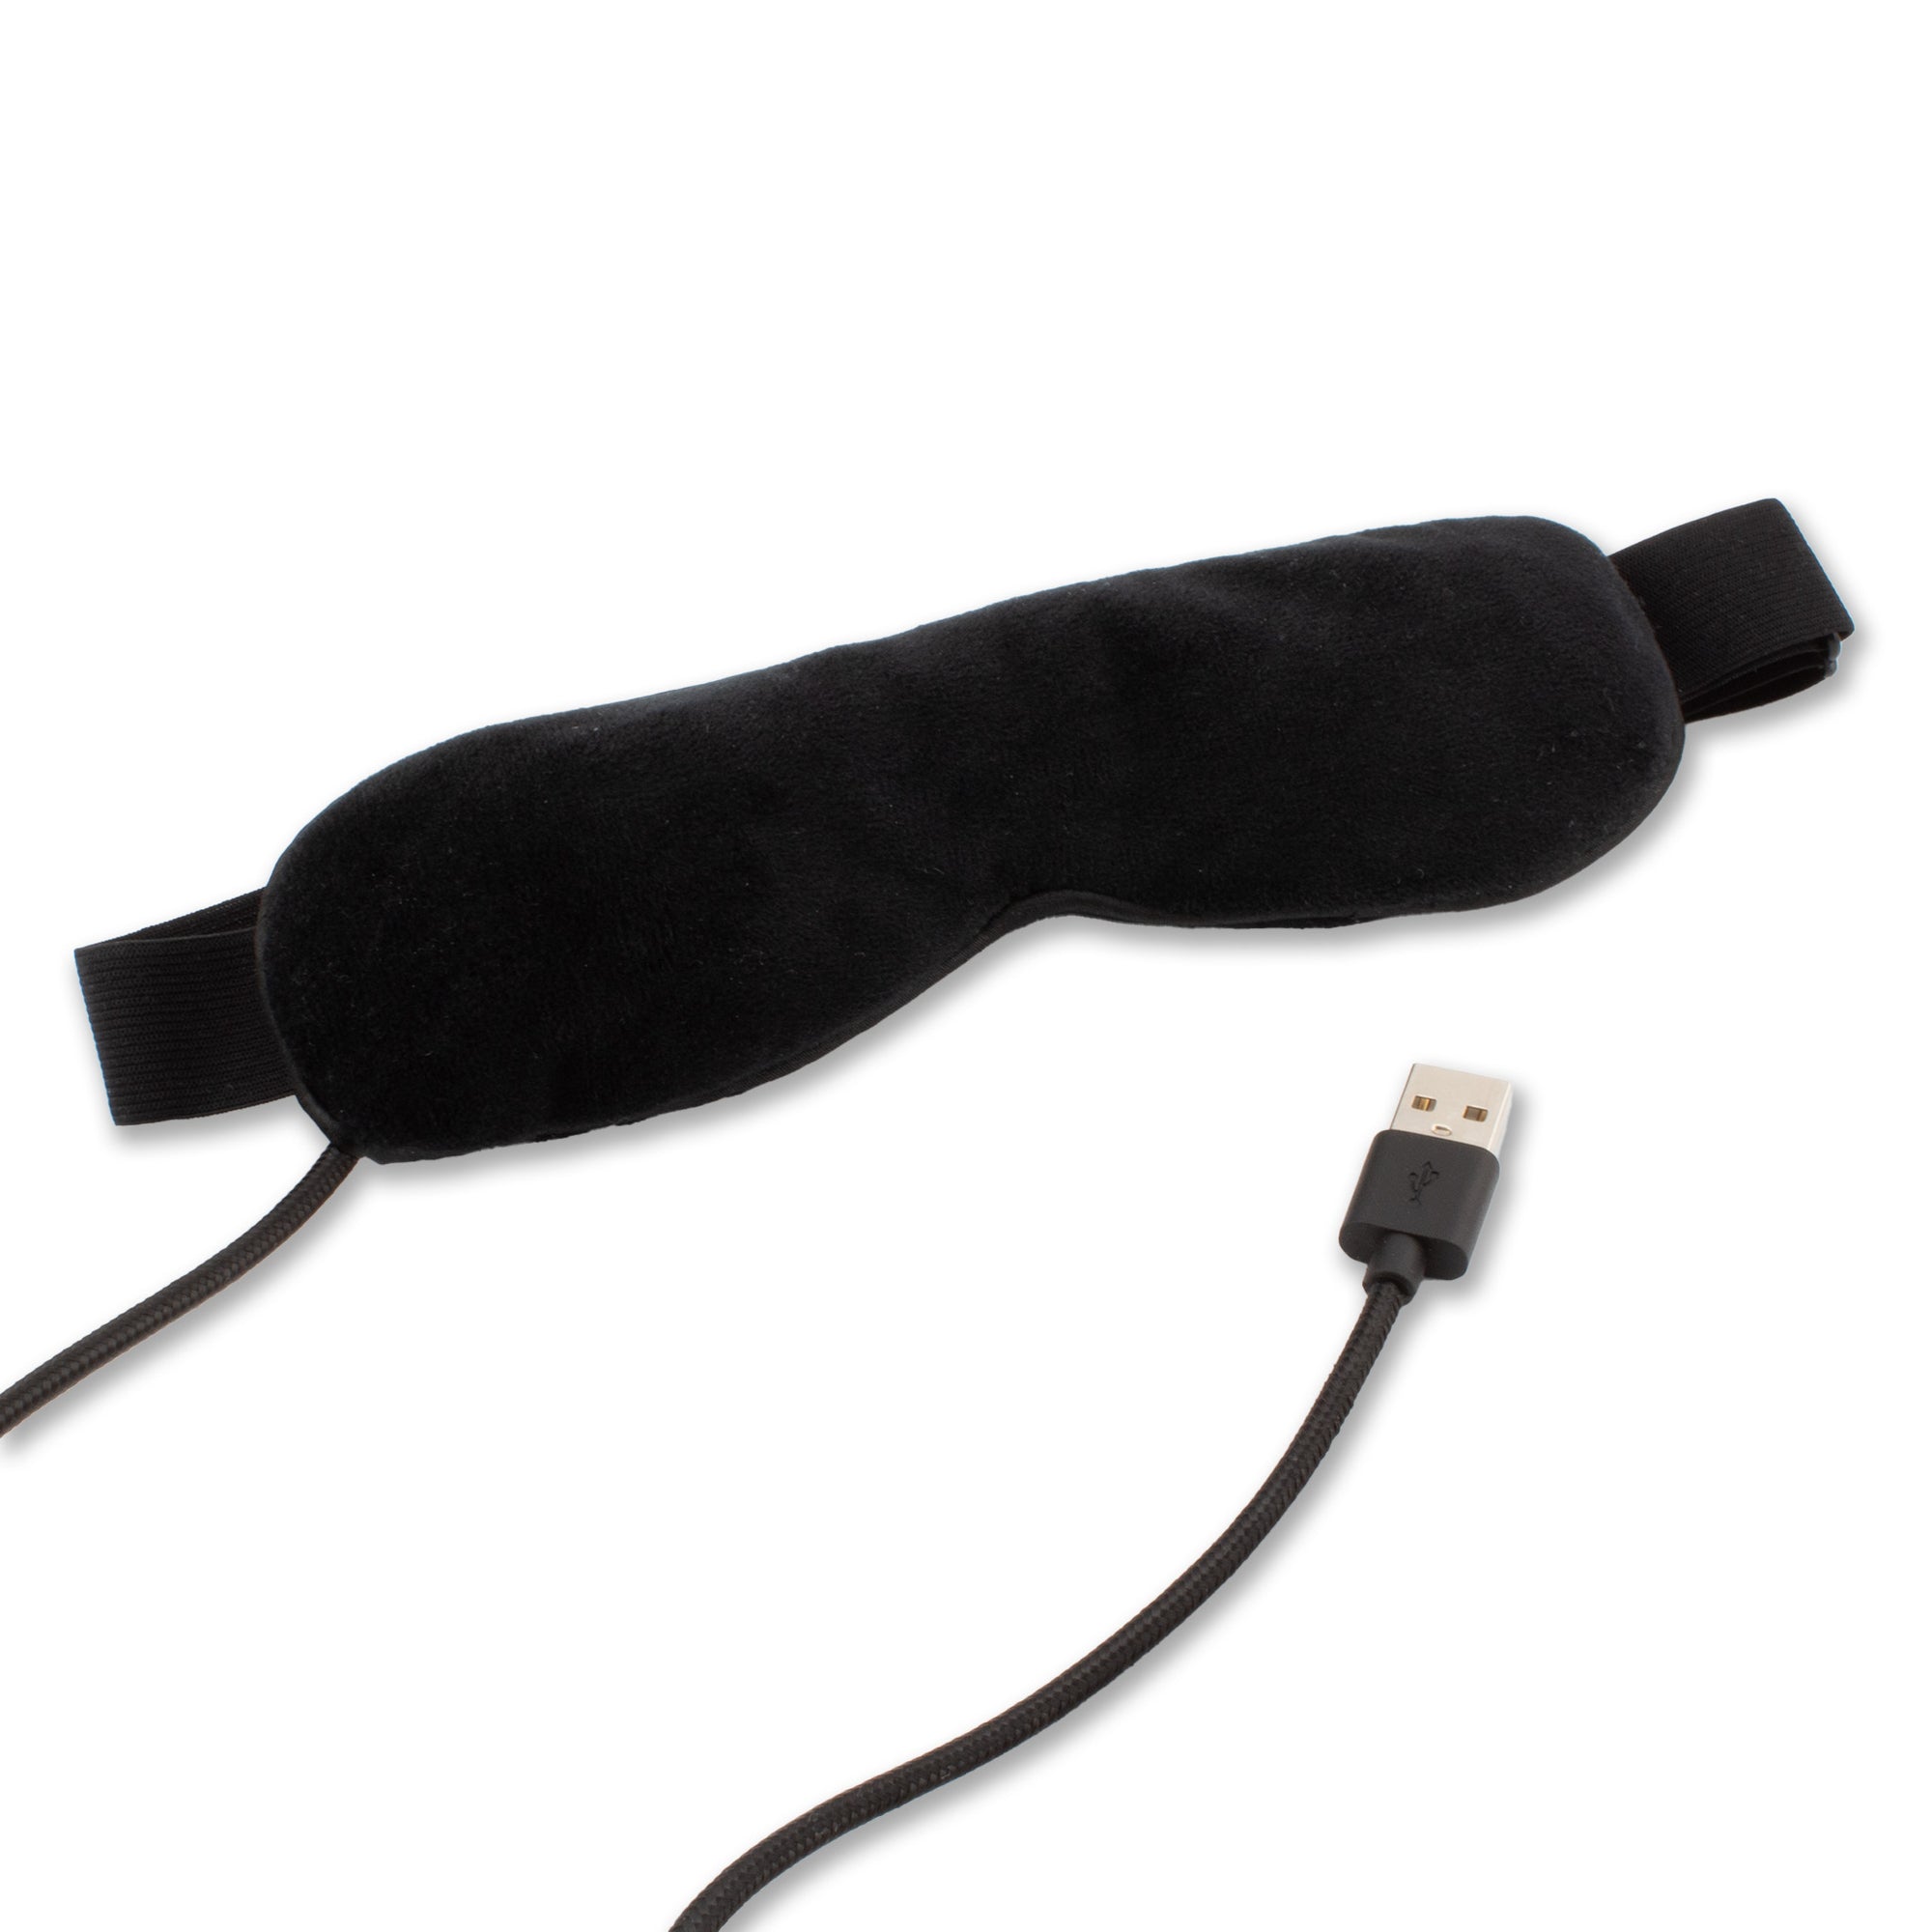 Wizard Research UK | Shop the Heated Eye Mask for Dry Eye Relief